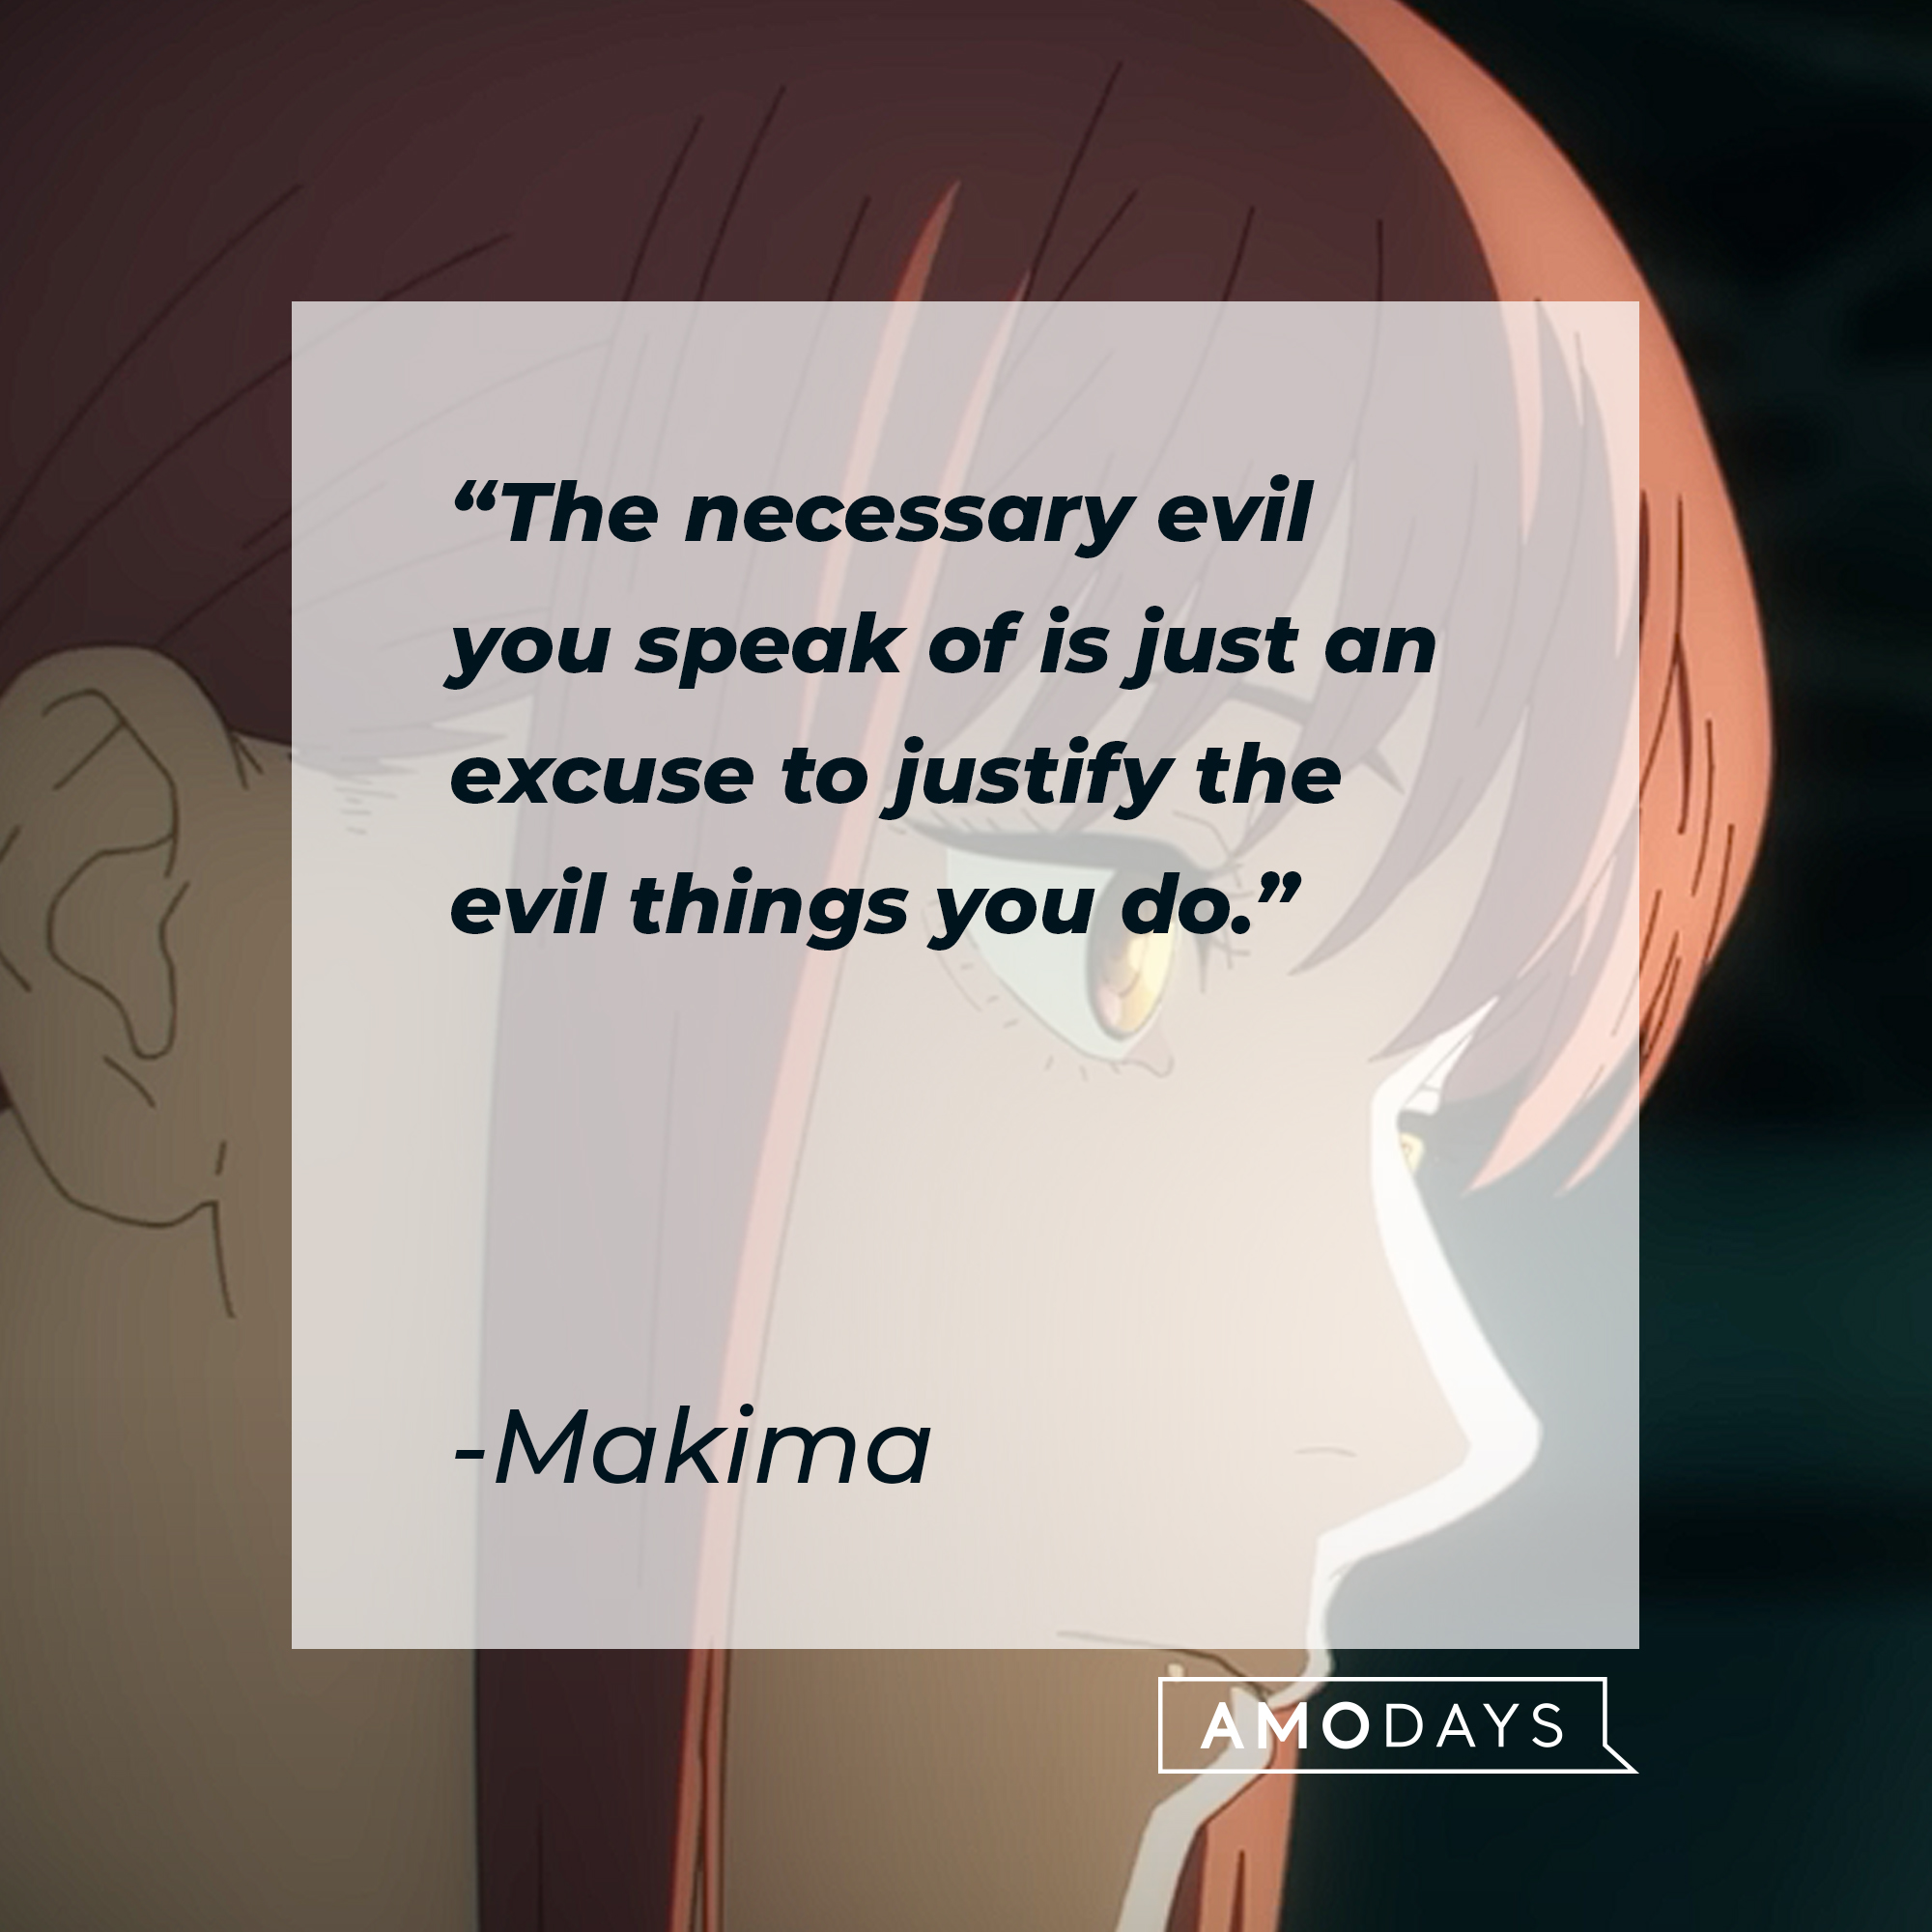 An image of Makima with her quote: “The necessary evil you speak of is just an excuse to justify the evil things you do.” | Source: youtube.com/CrunchyrollCollection